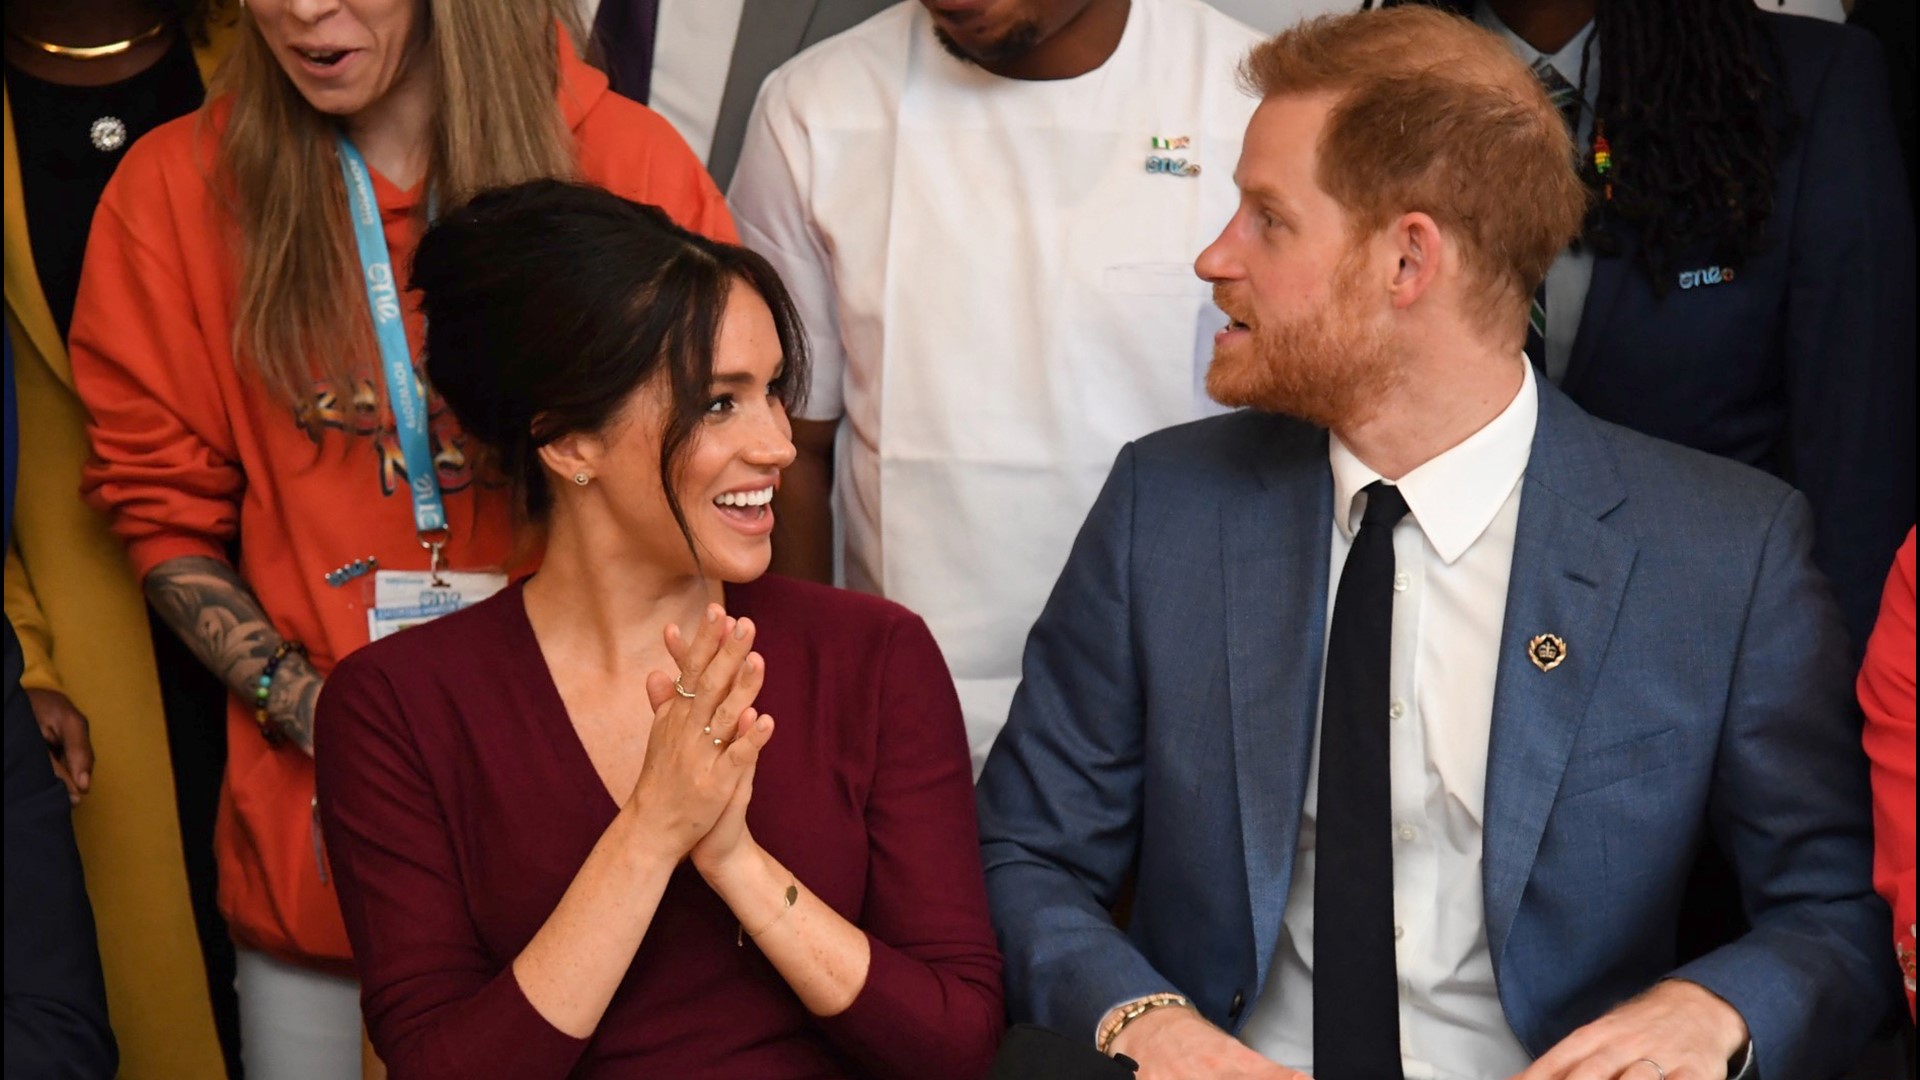 The Duke of Sussex plans to publish his memoir in late 2022. Here's why! Buzz60's Chloe Hurst has the story!